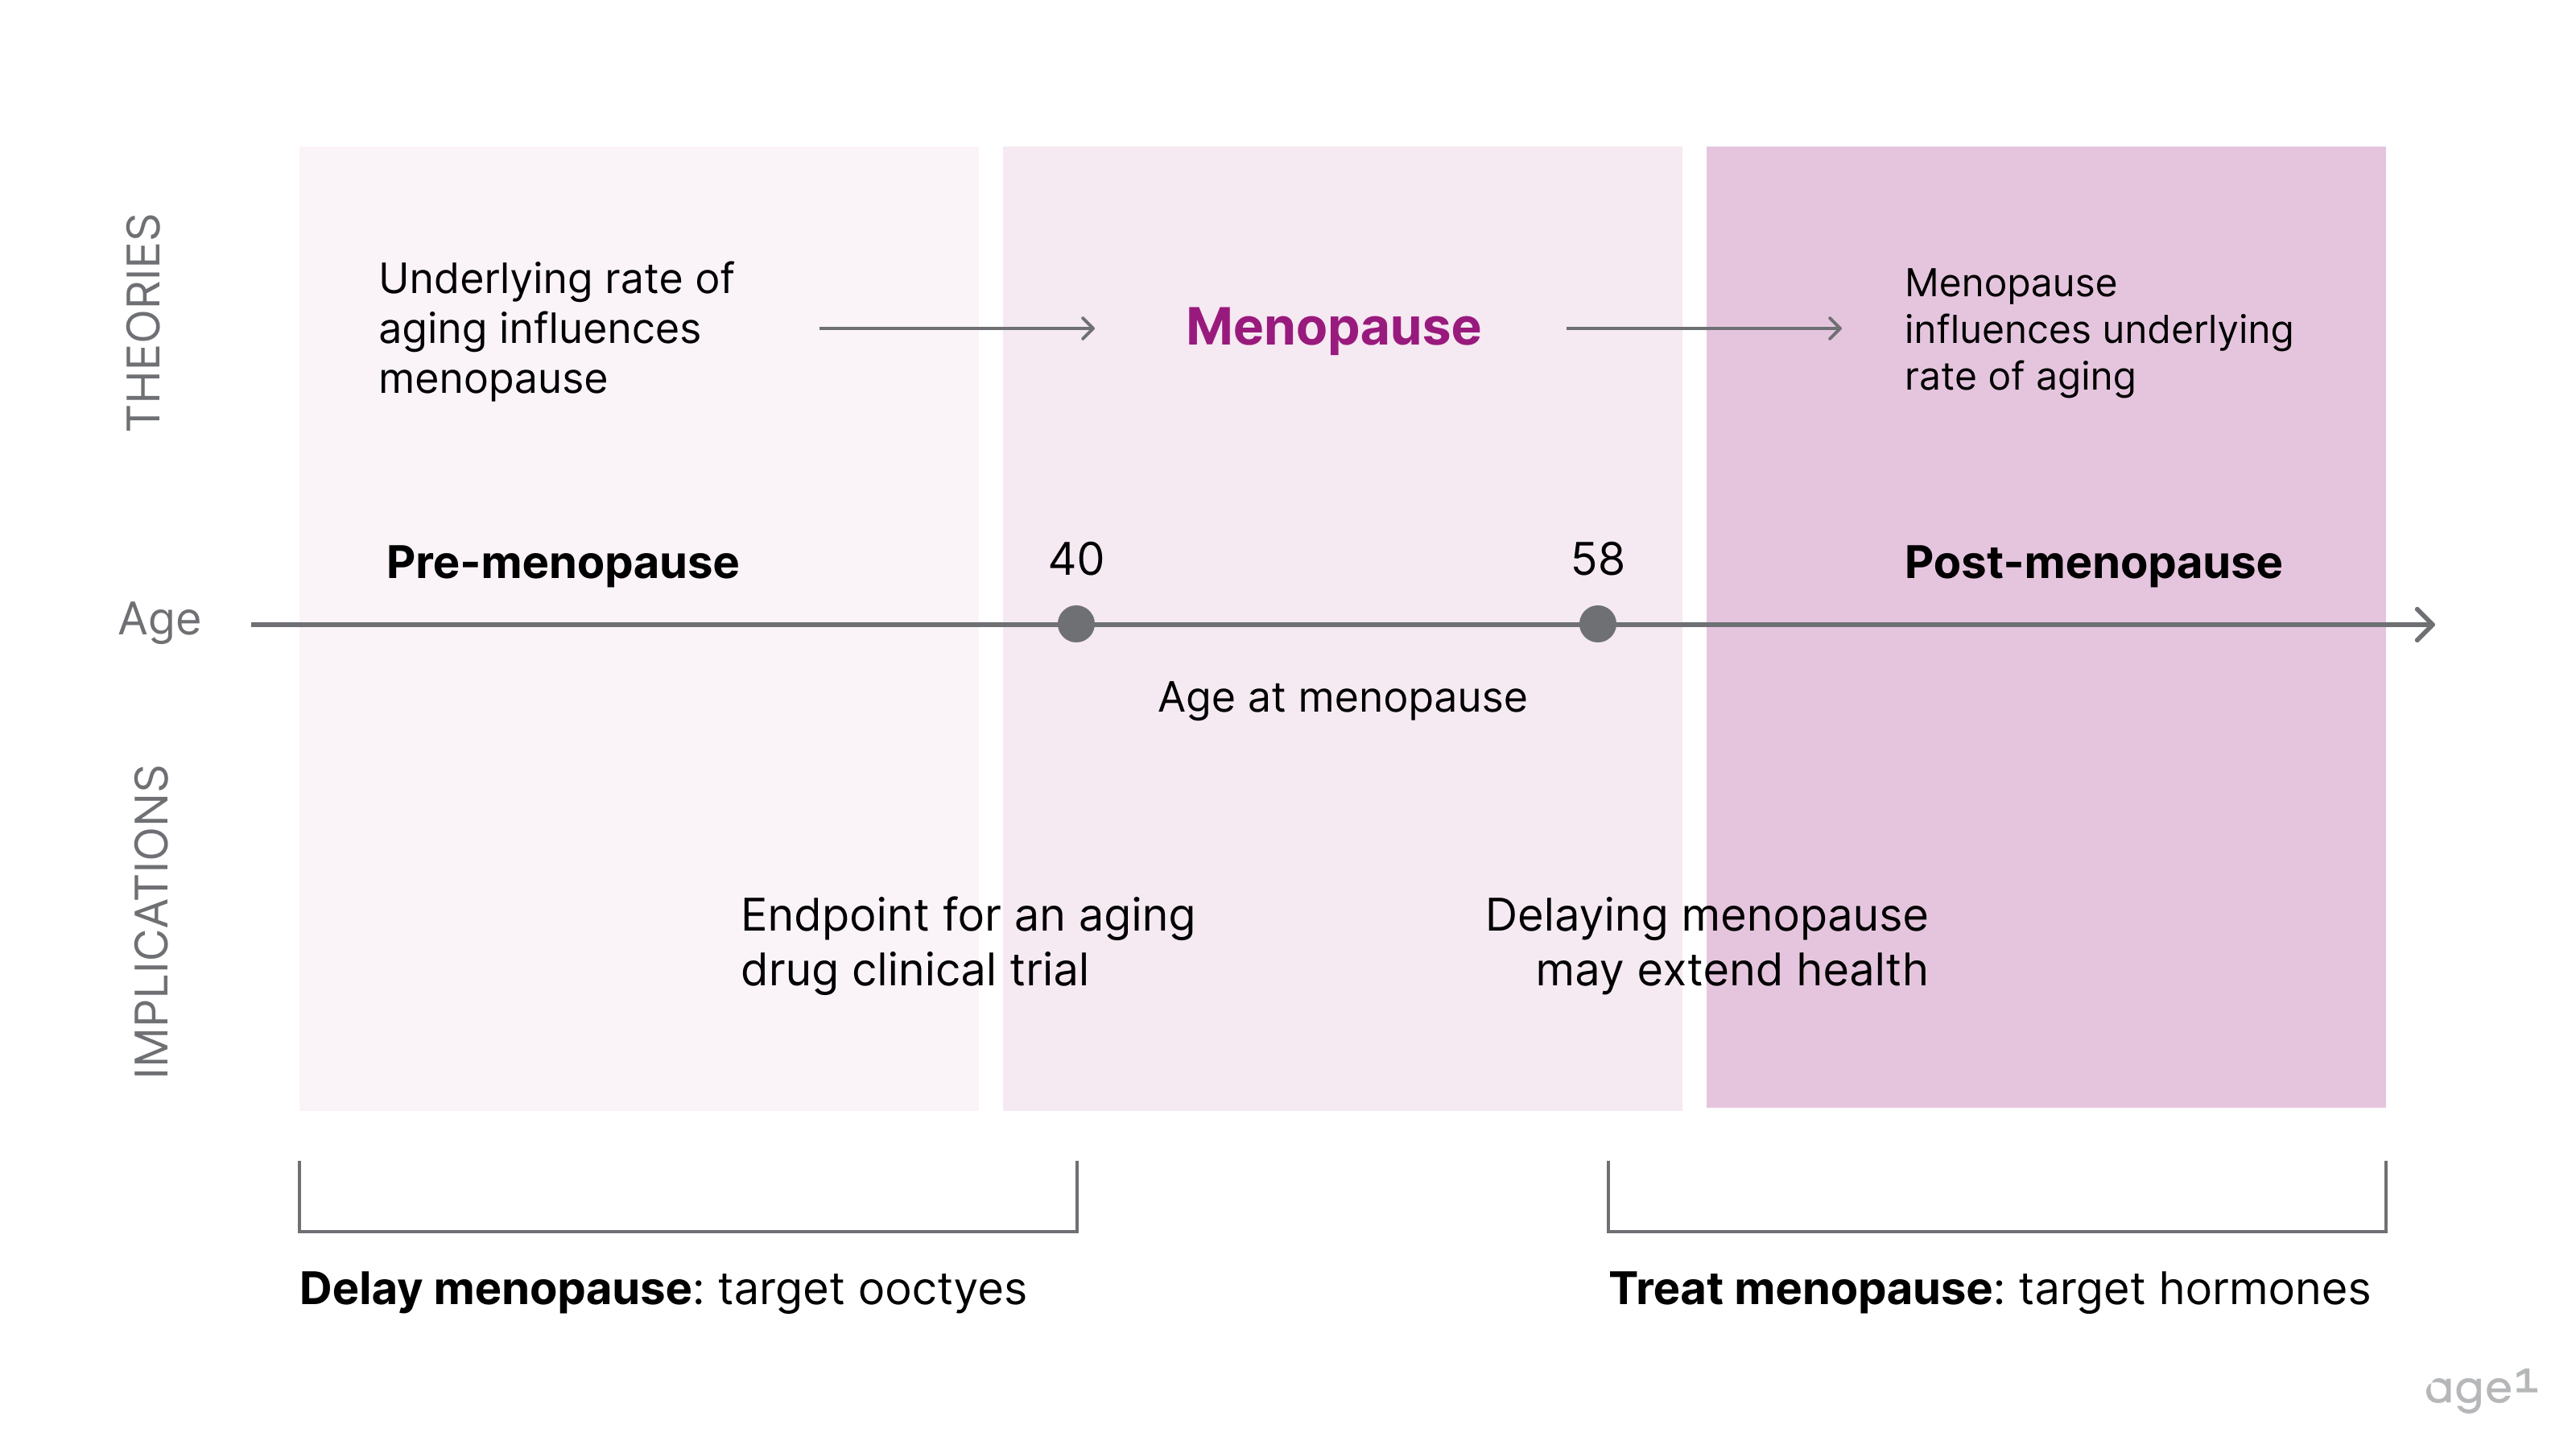 Childbirth close to natural menopause: does age at menopause matter? -  ScienceDirect